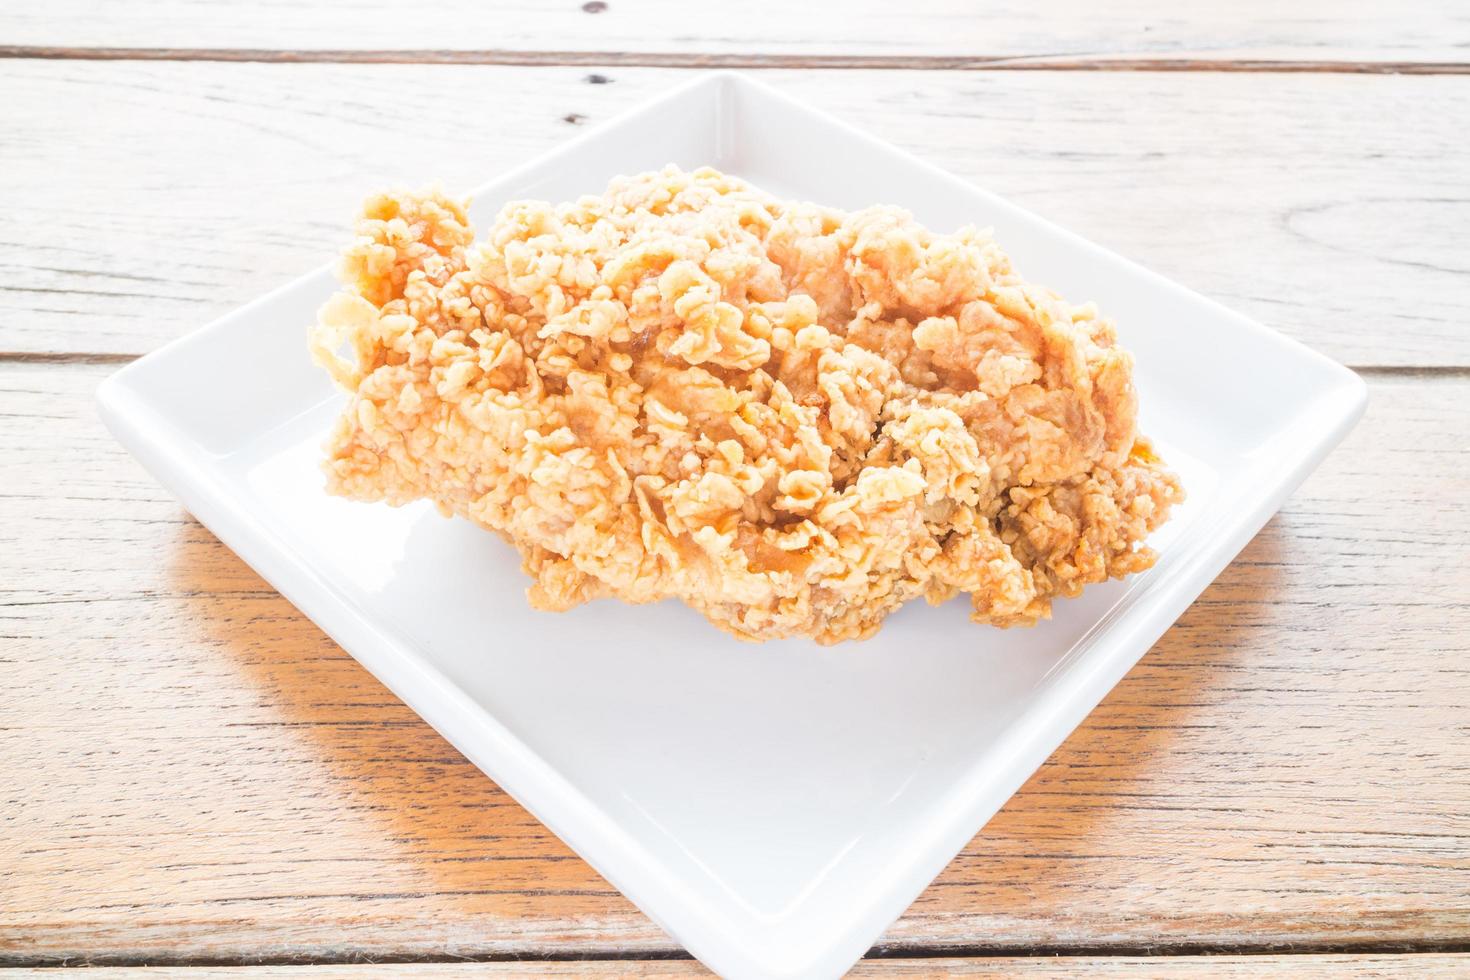 Fried chicken on a plate photo